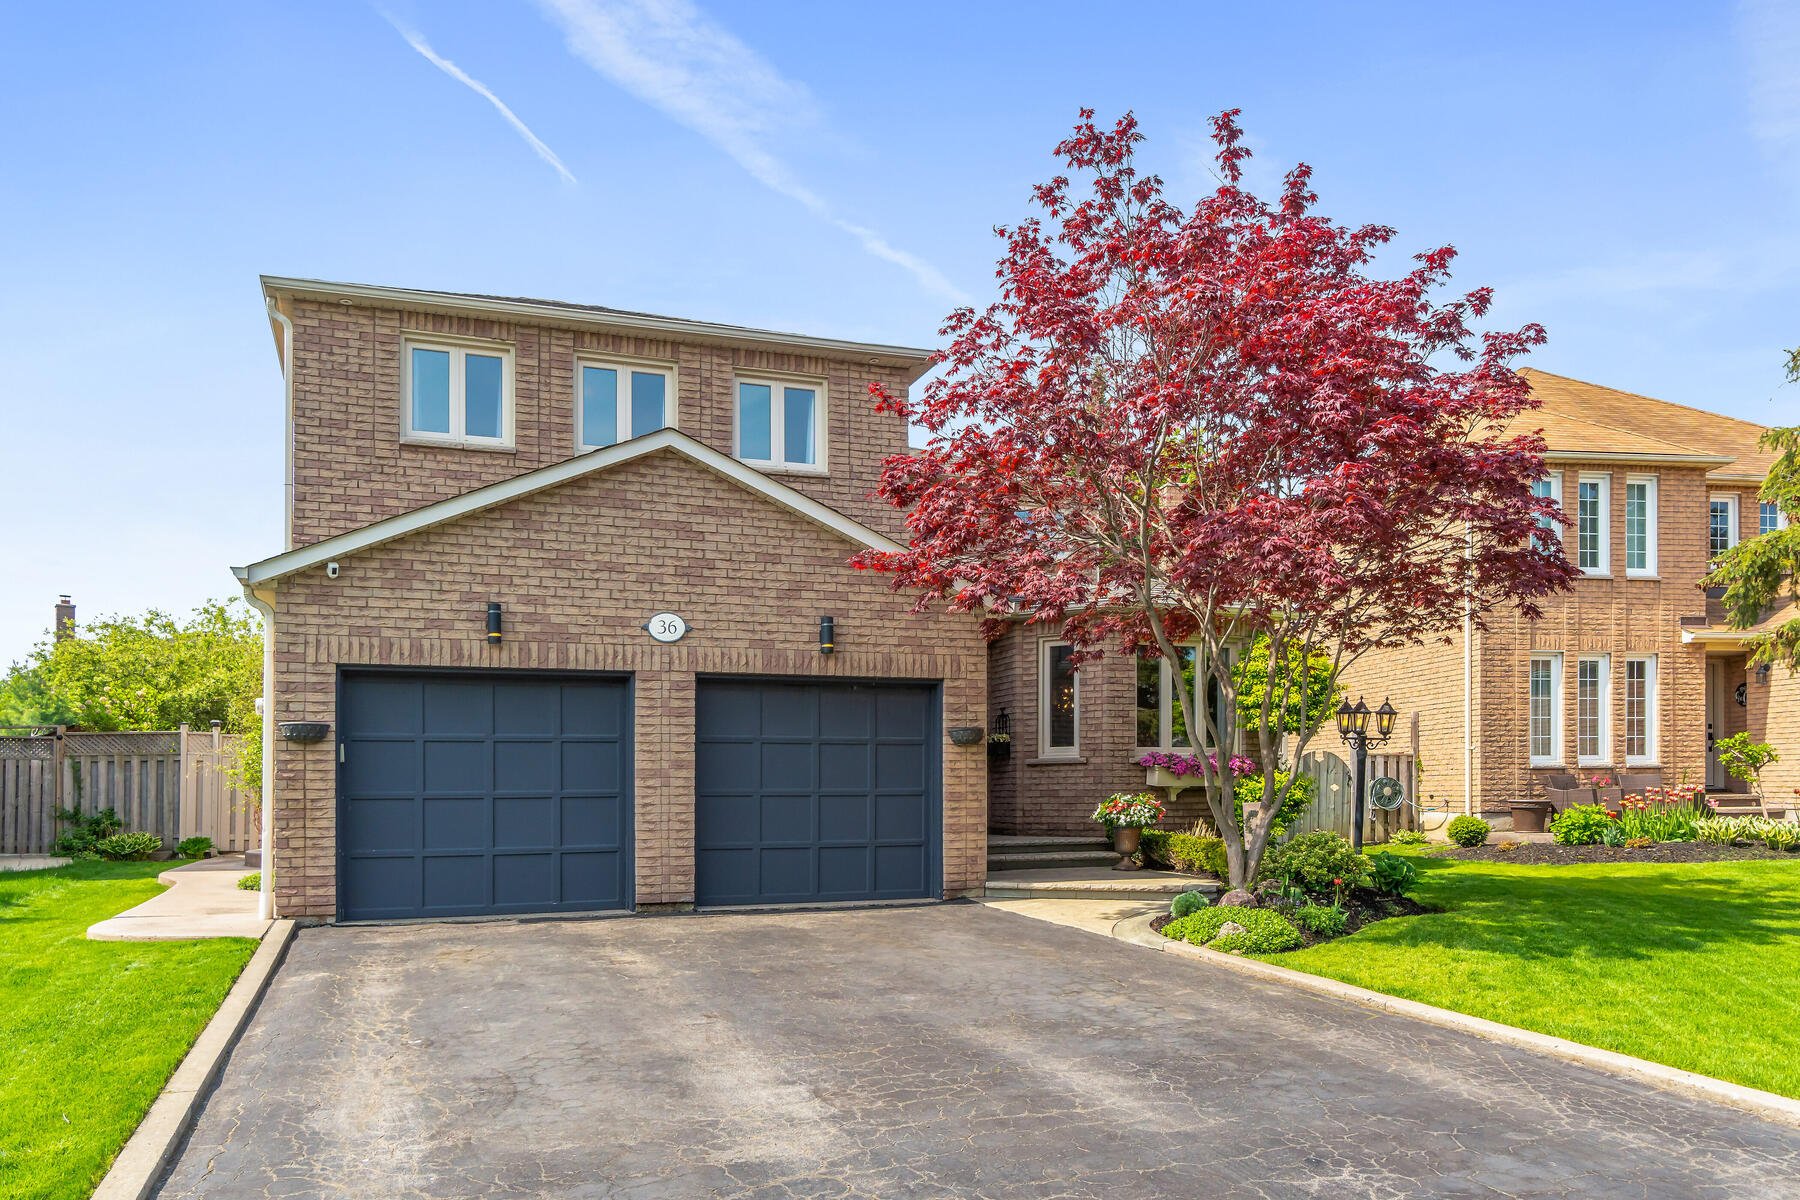 36 Treanor Cres Georgetown ON L7G 5H9 Canada-011-096-3-MLS_Size.jpg